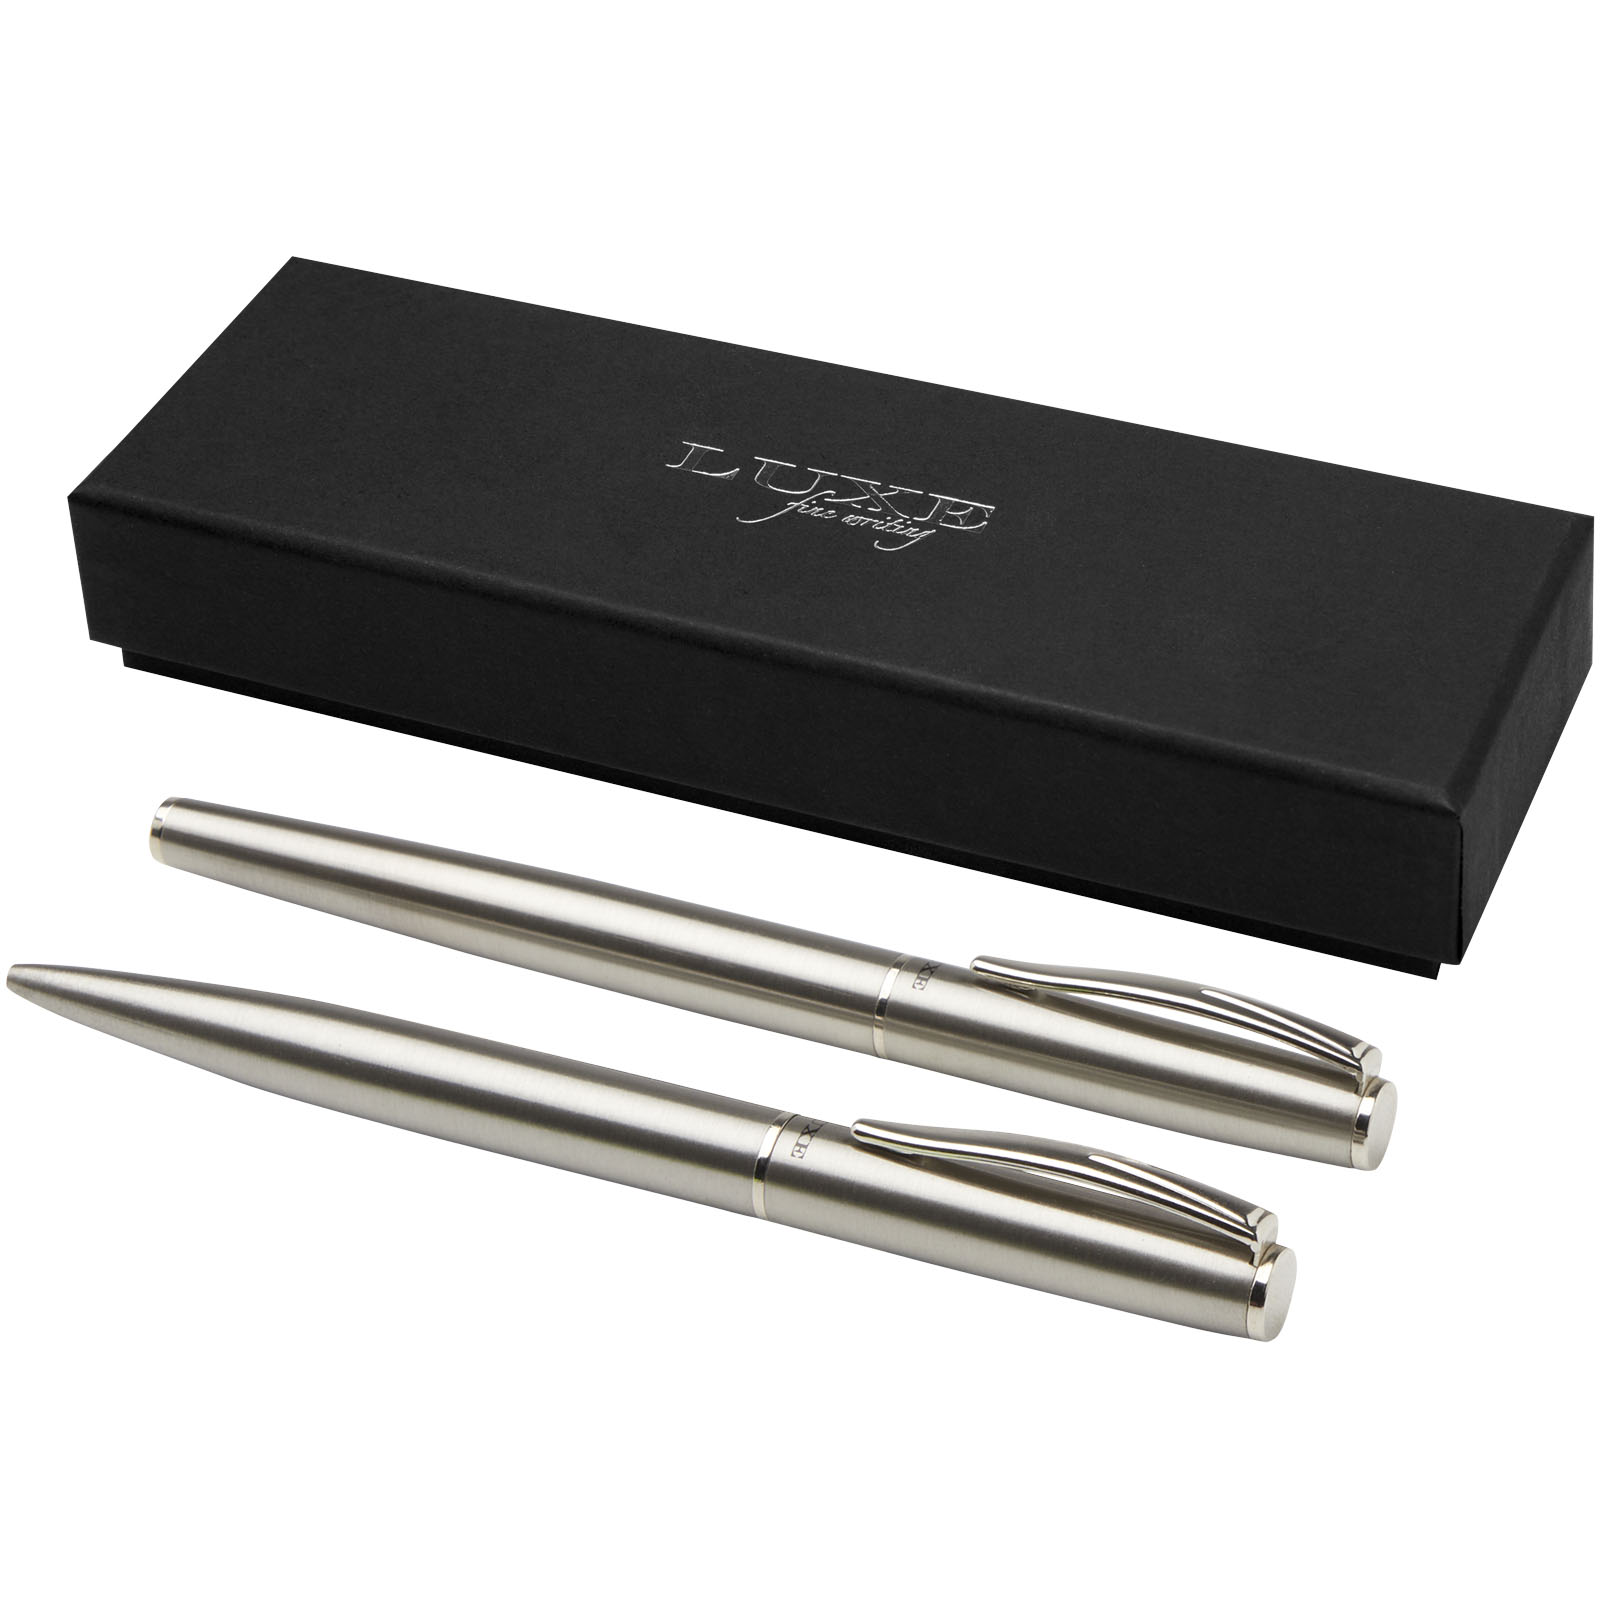 Gift sets - Didimis recycled stainless steel ballpoint and rollerball pen set